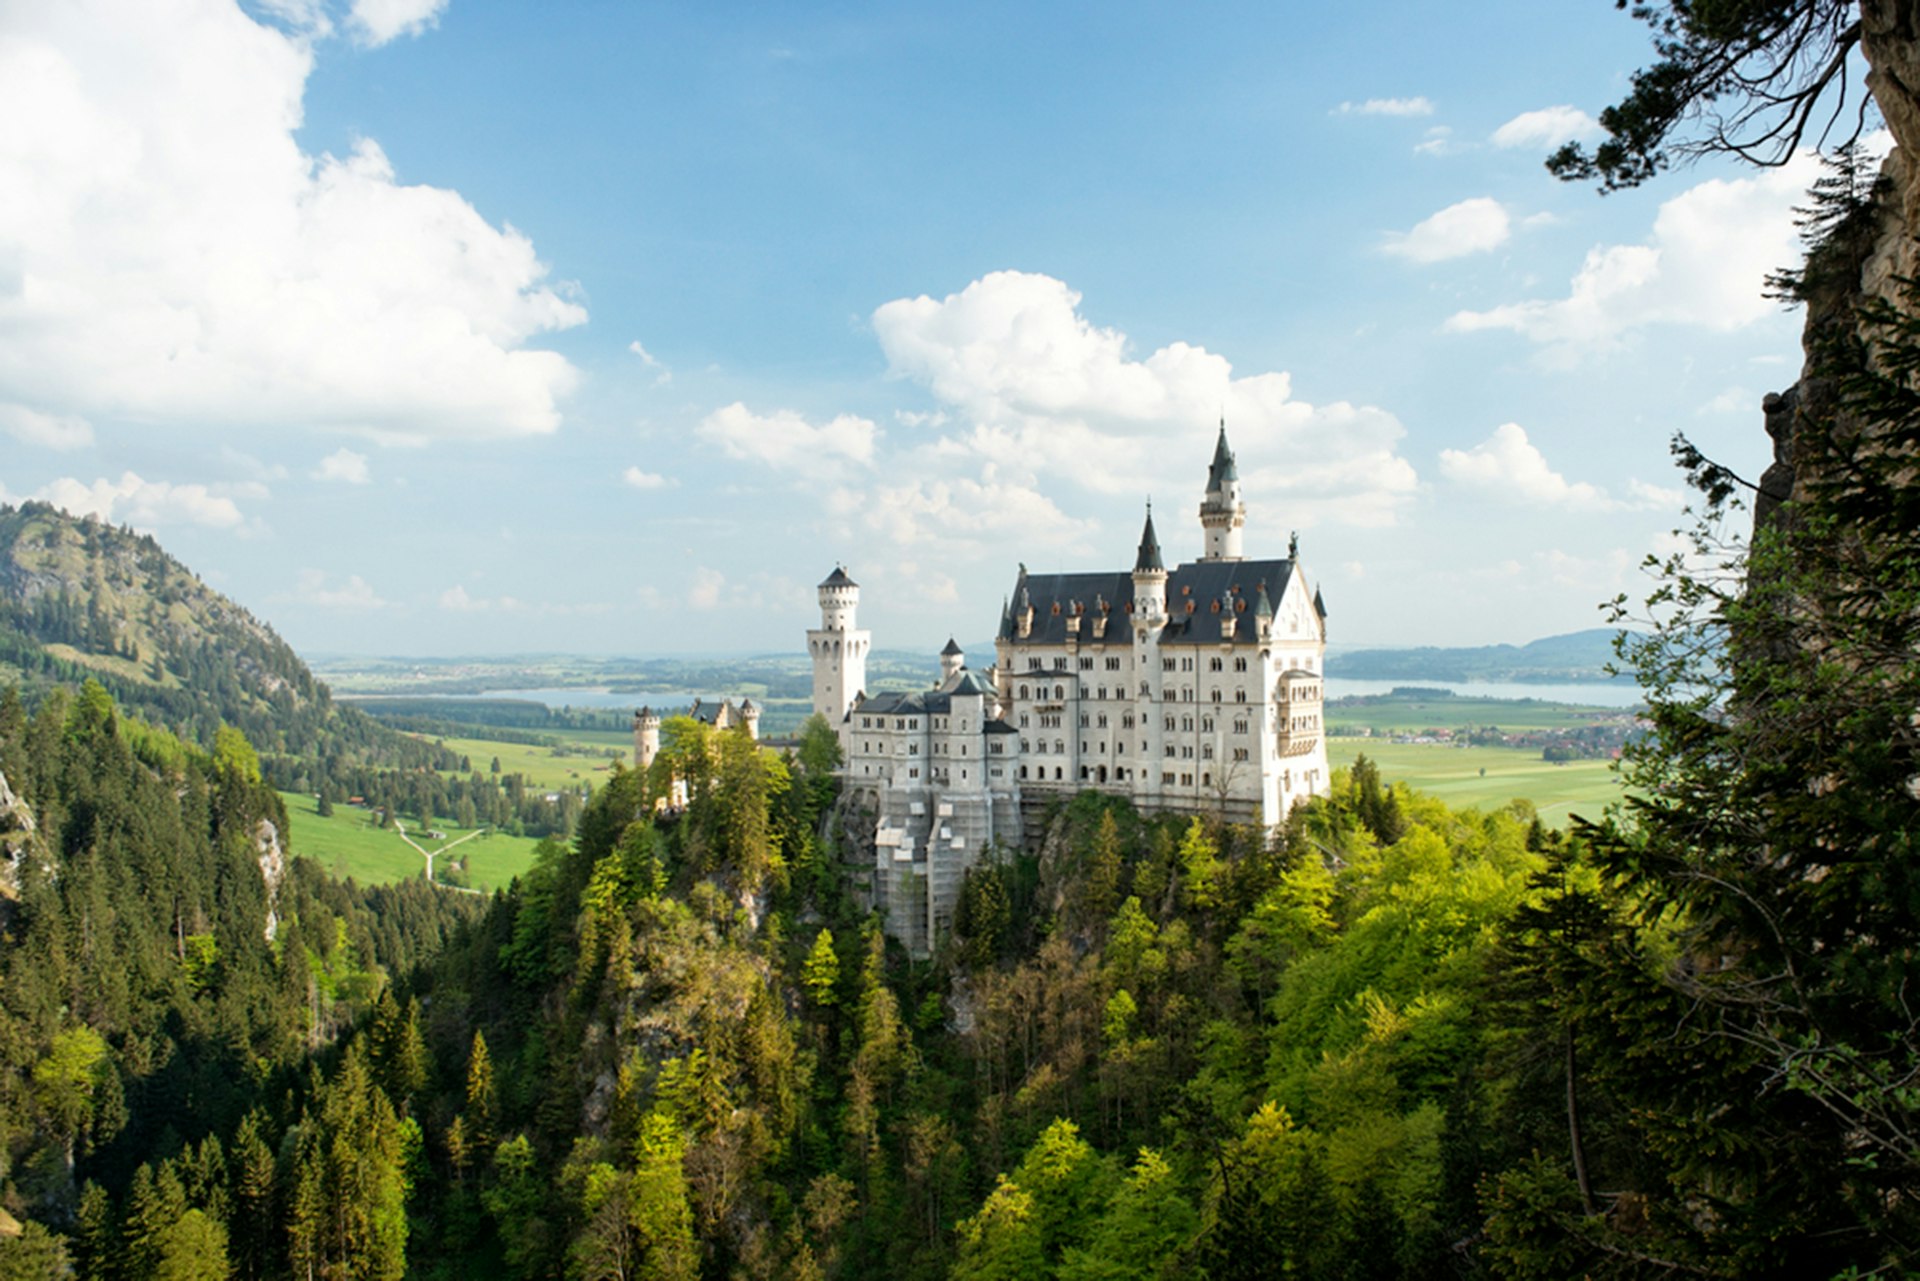 A fairytale-style castle rises from lush green hills in Bavaria, Germany. 